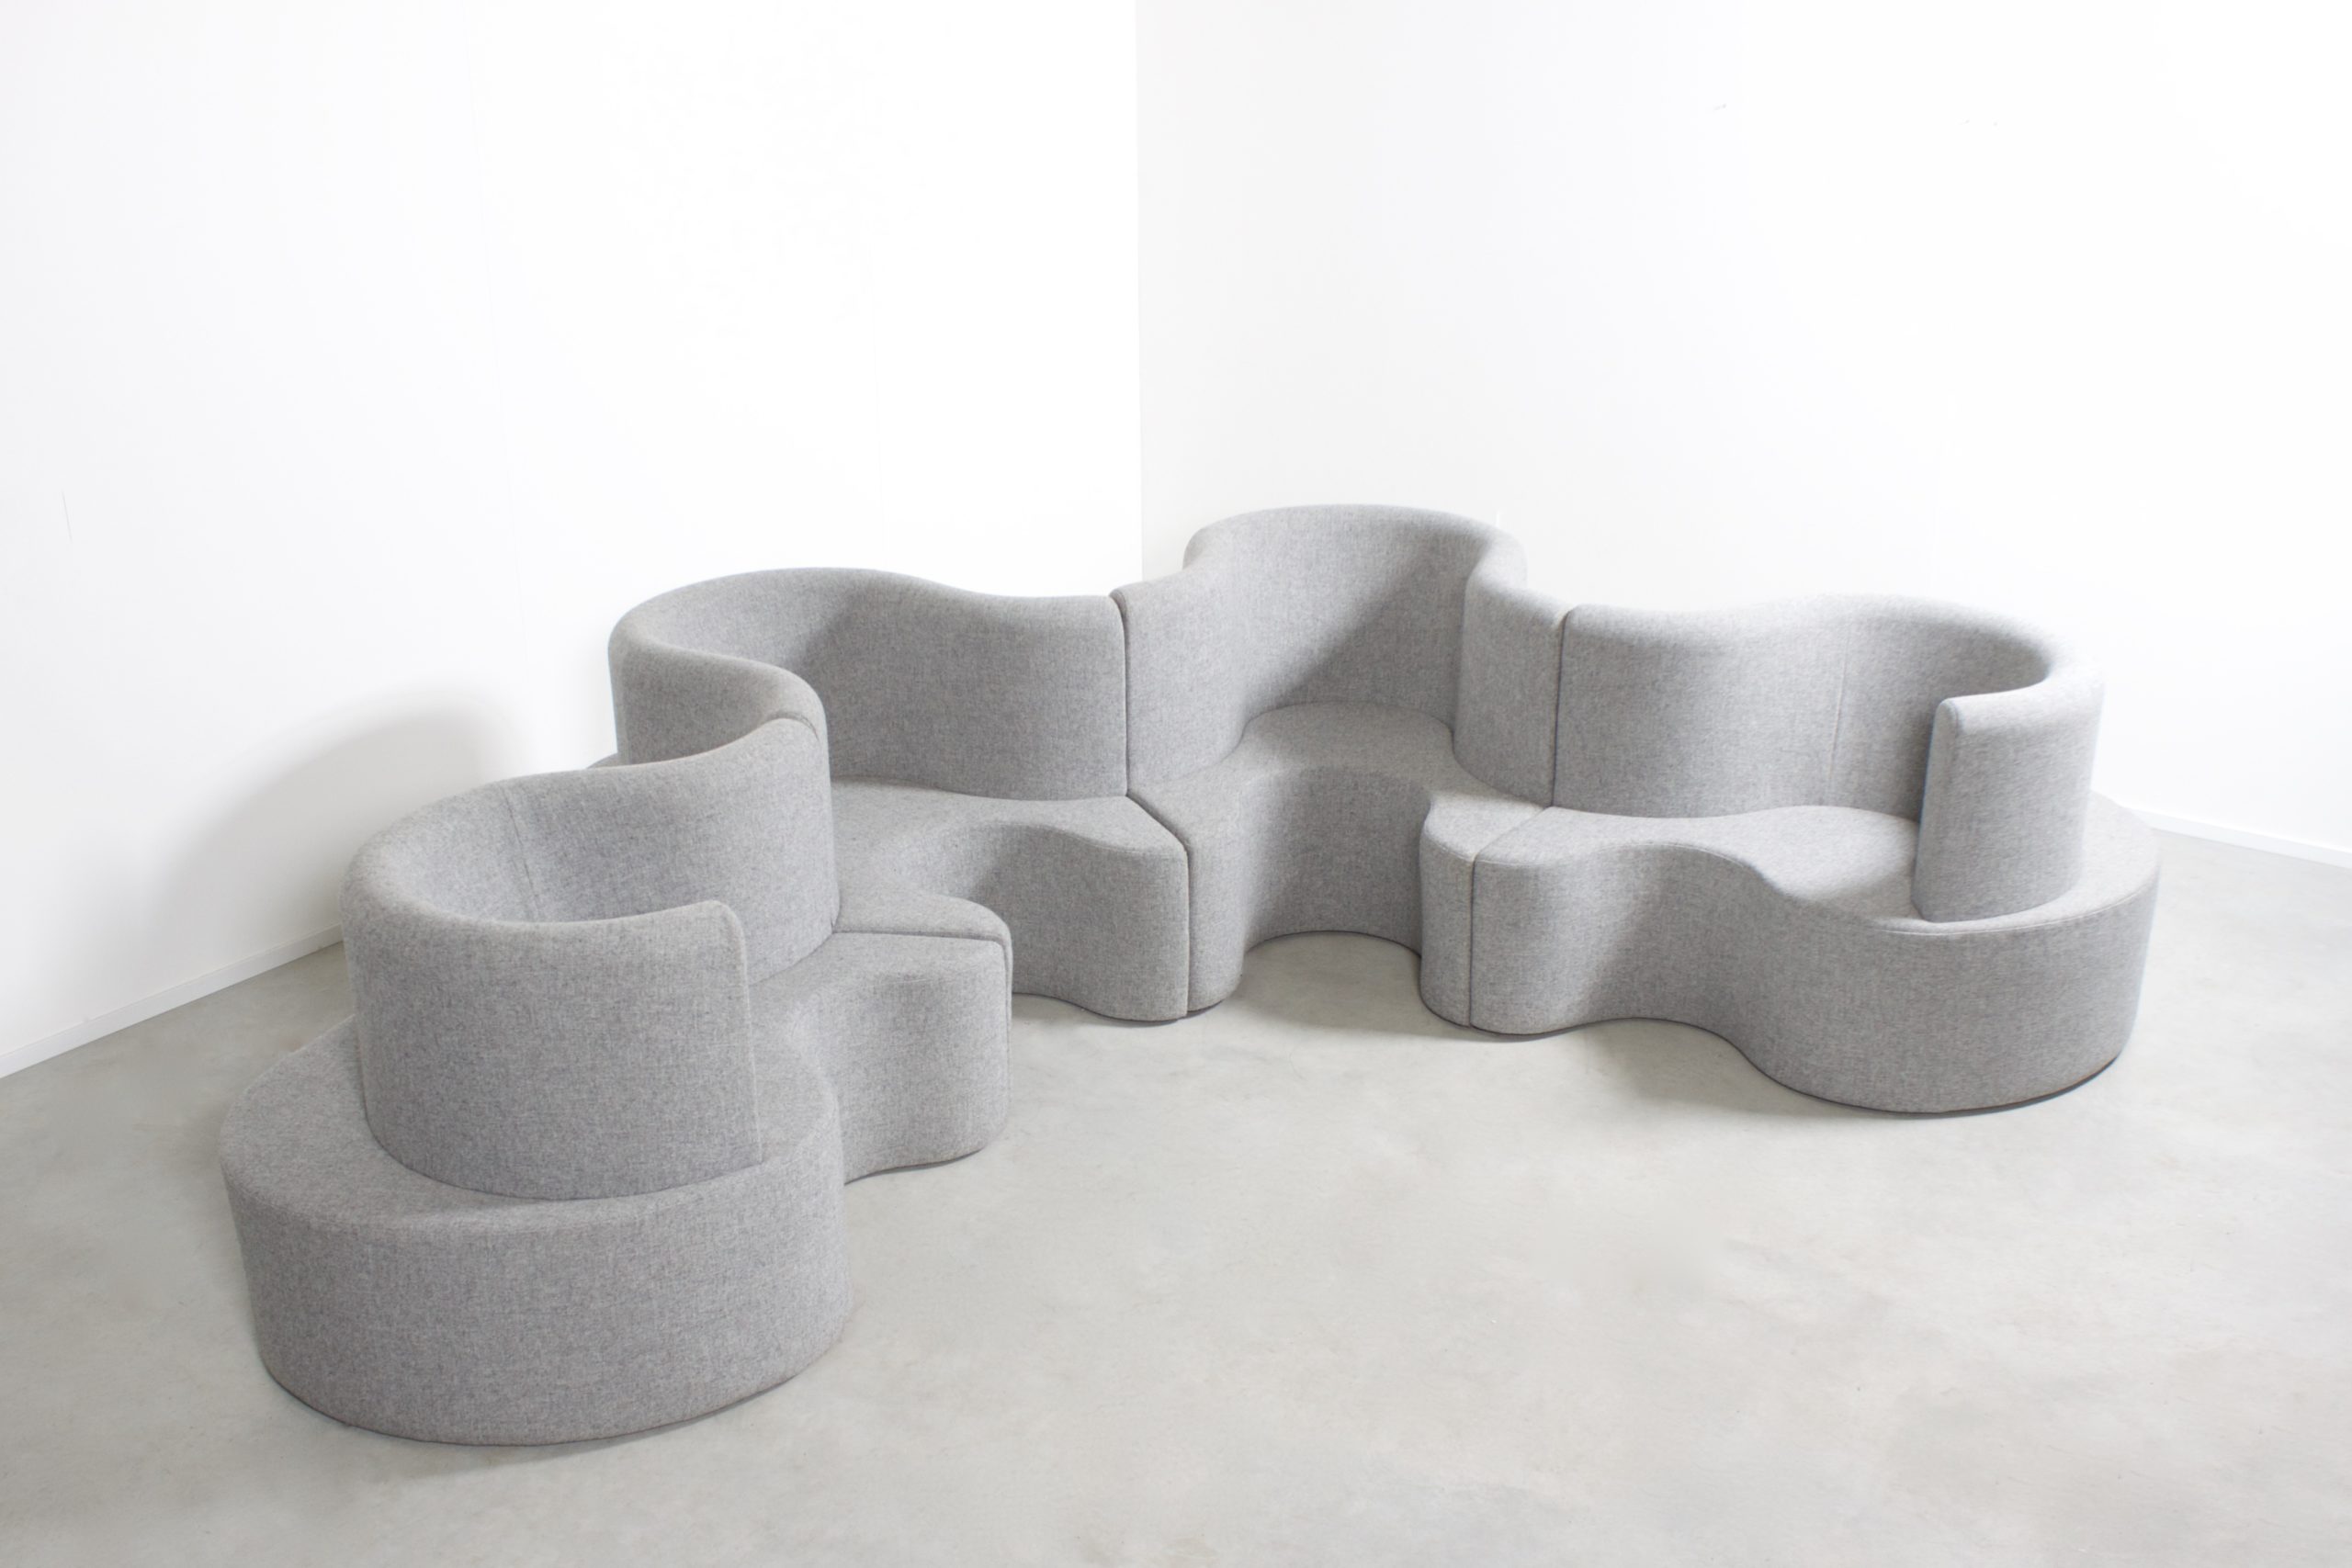 Impressive Clover Leaf Sectional Sofa by Verner Panton in Grey Fabric